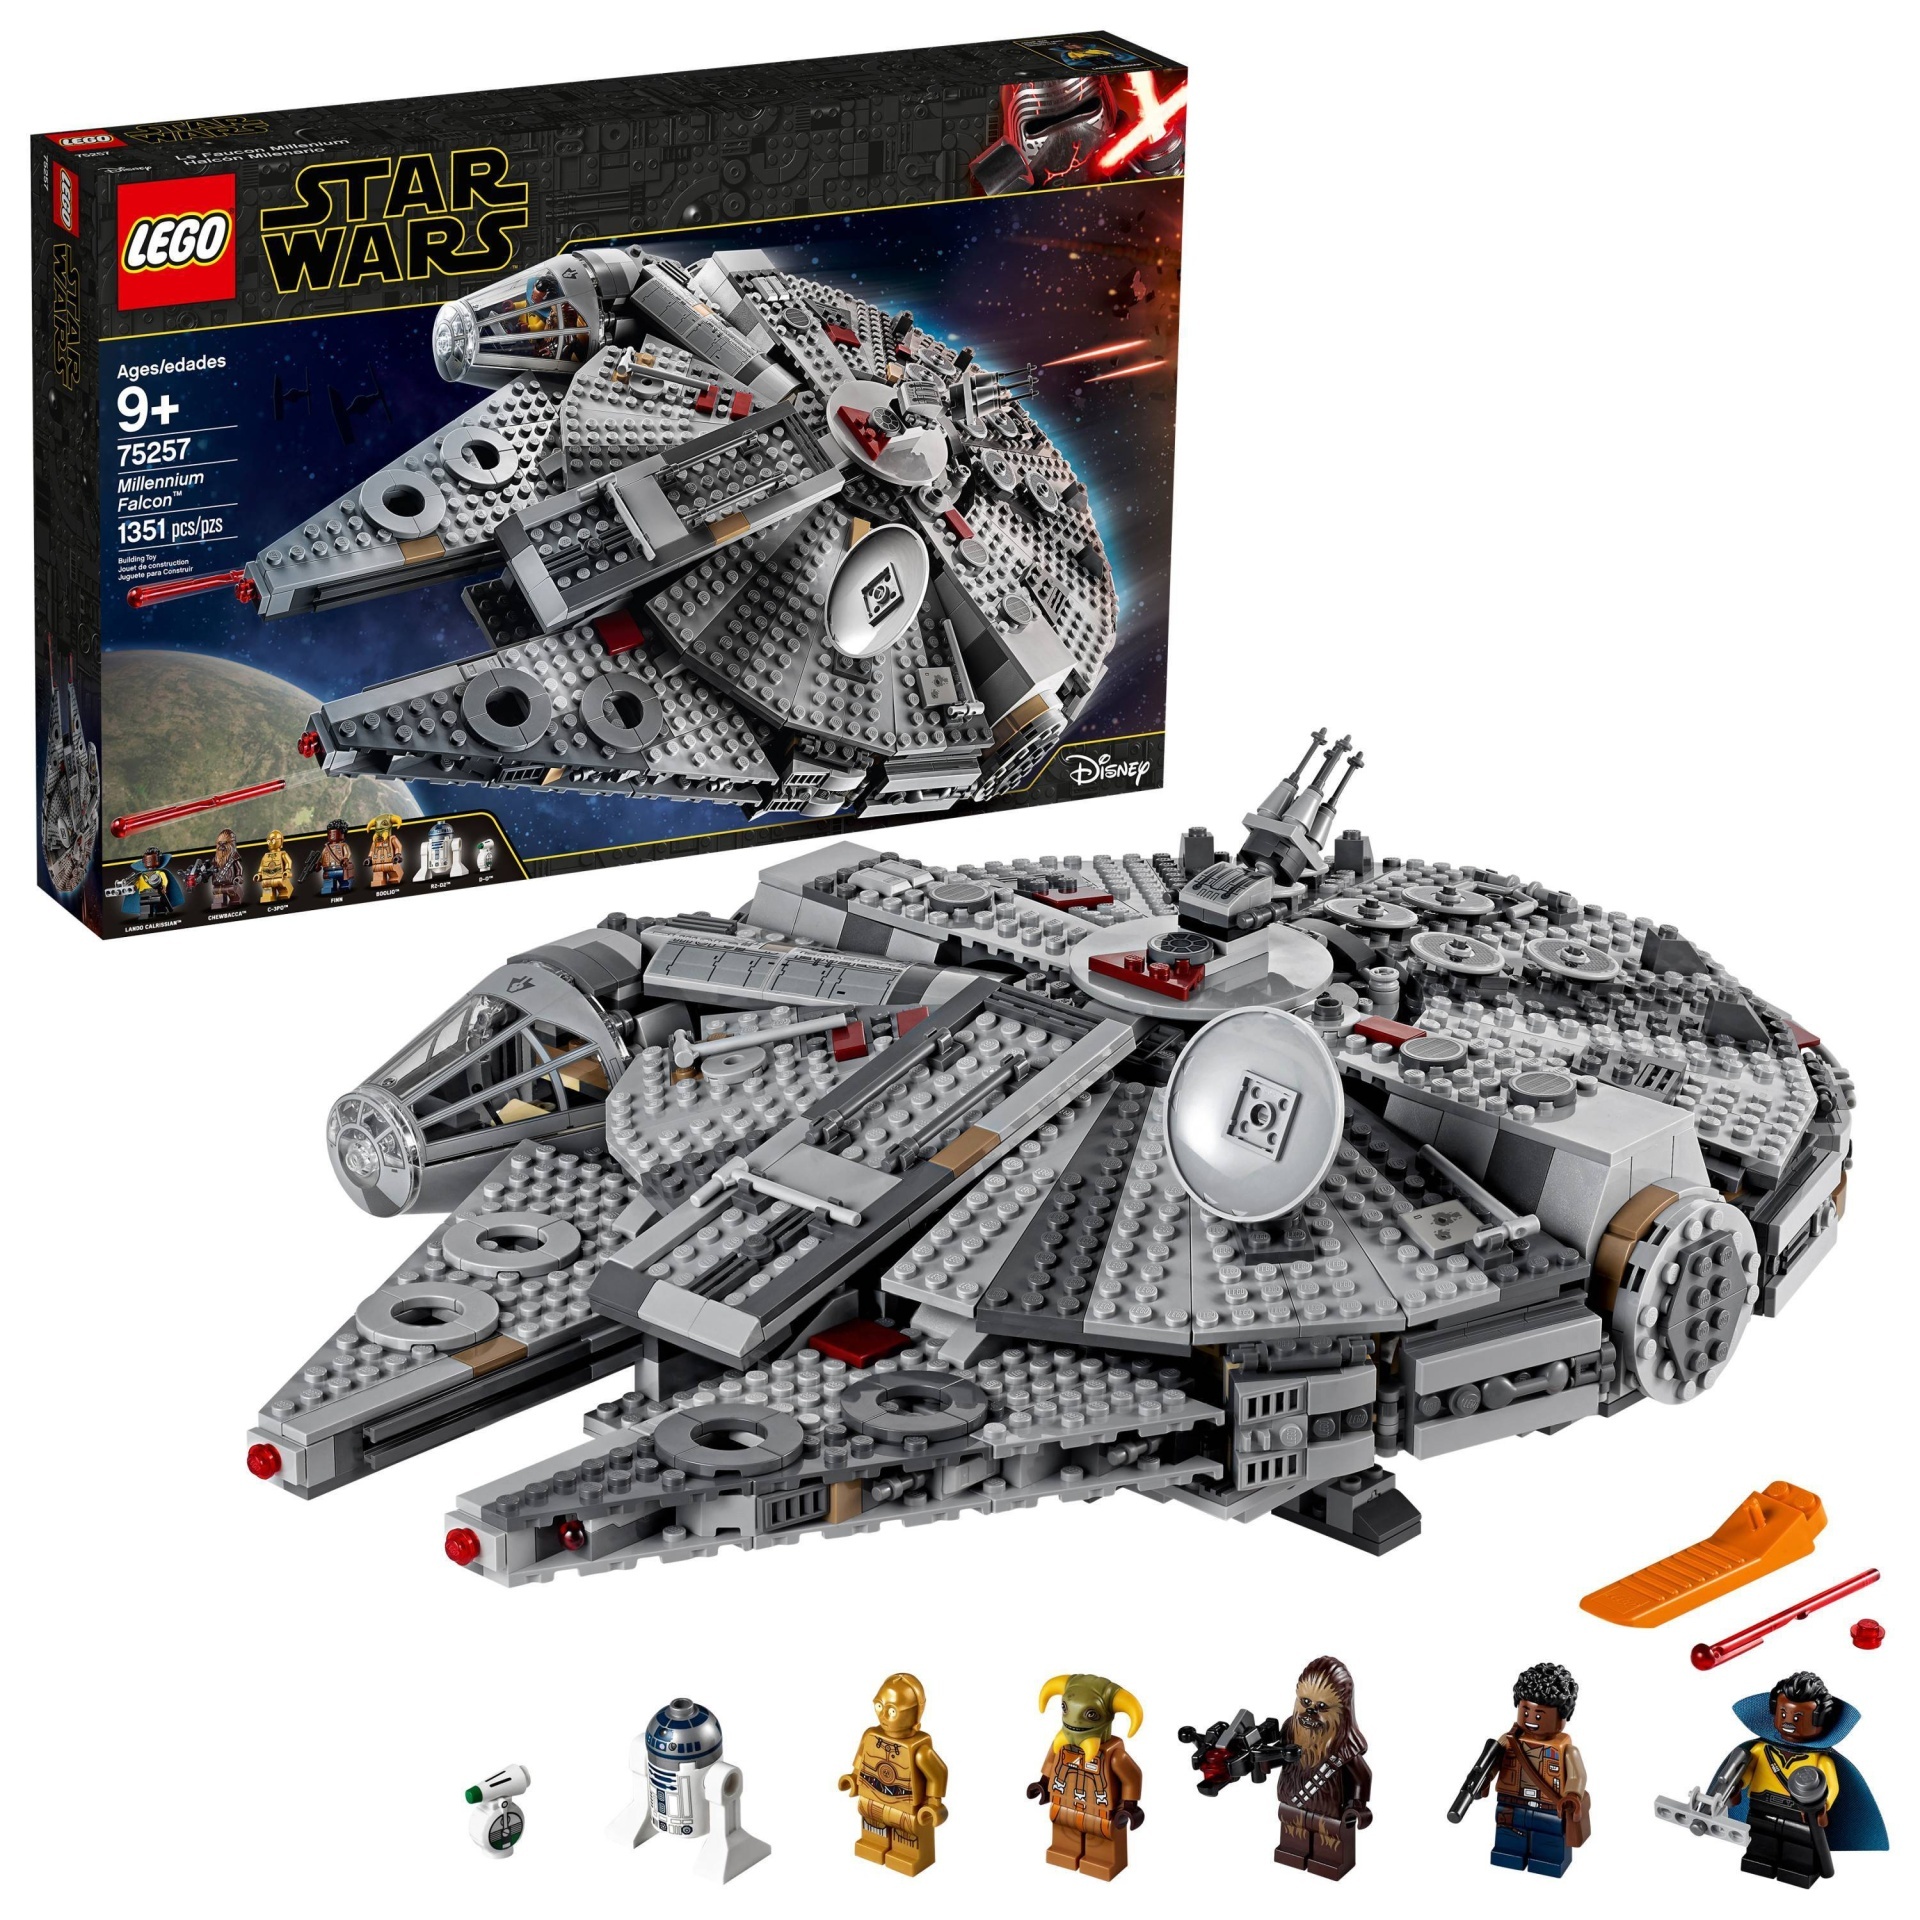 slide 1 of 7, LEGO Star Wars: The Rise of Skywalker Millennium Falcon Building Kit Starship Model with Minifigures 75257, 1 ct